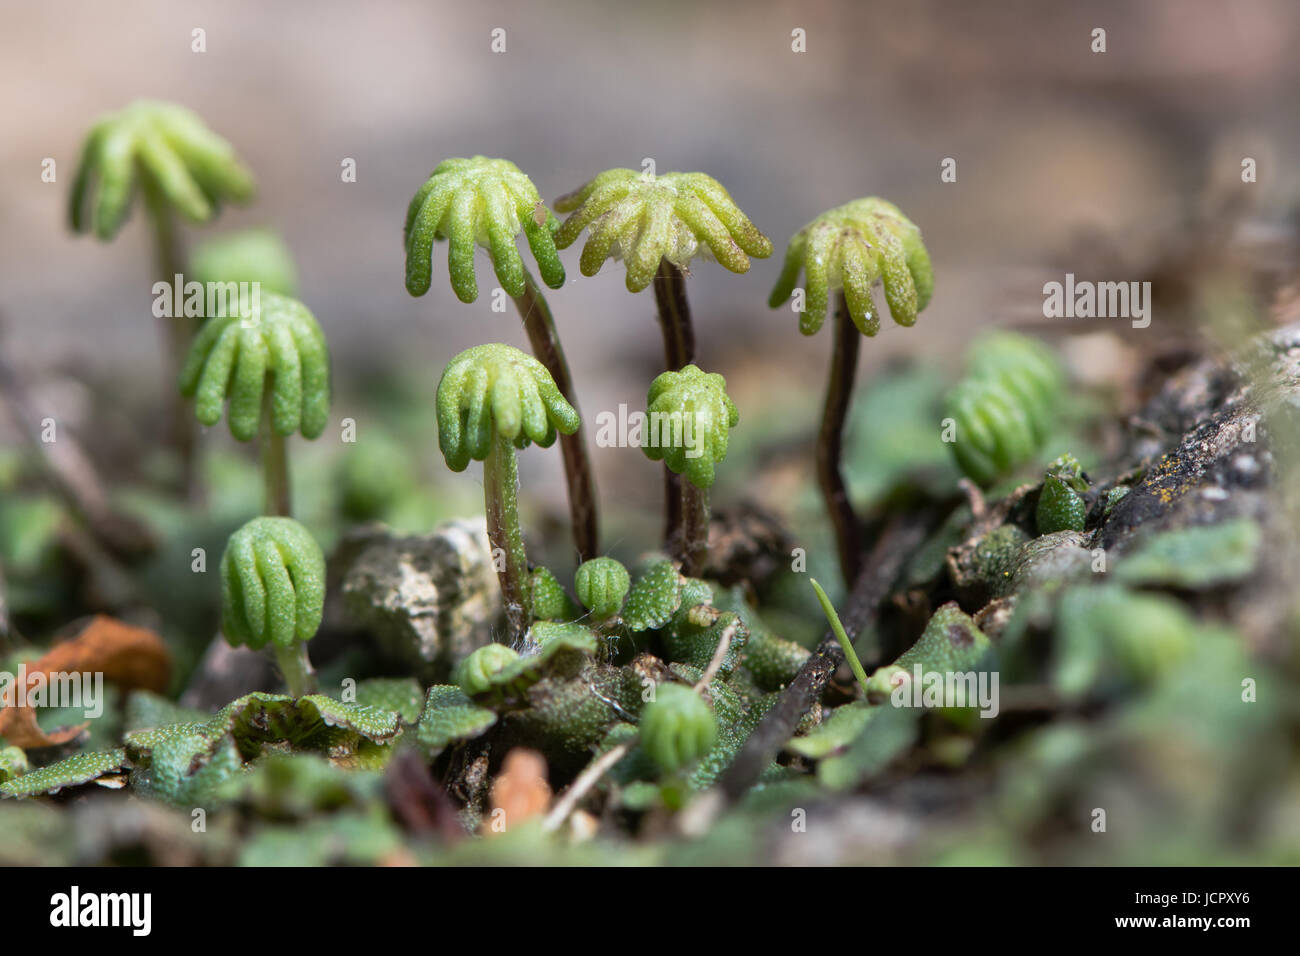 Marchantia polymorpha liverwort gametospores. Umbrella-like reproductive structures of female plant in the order Marchantiales Stock Photo